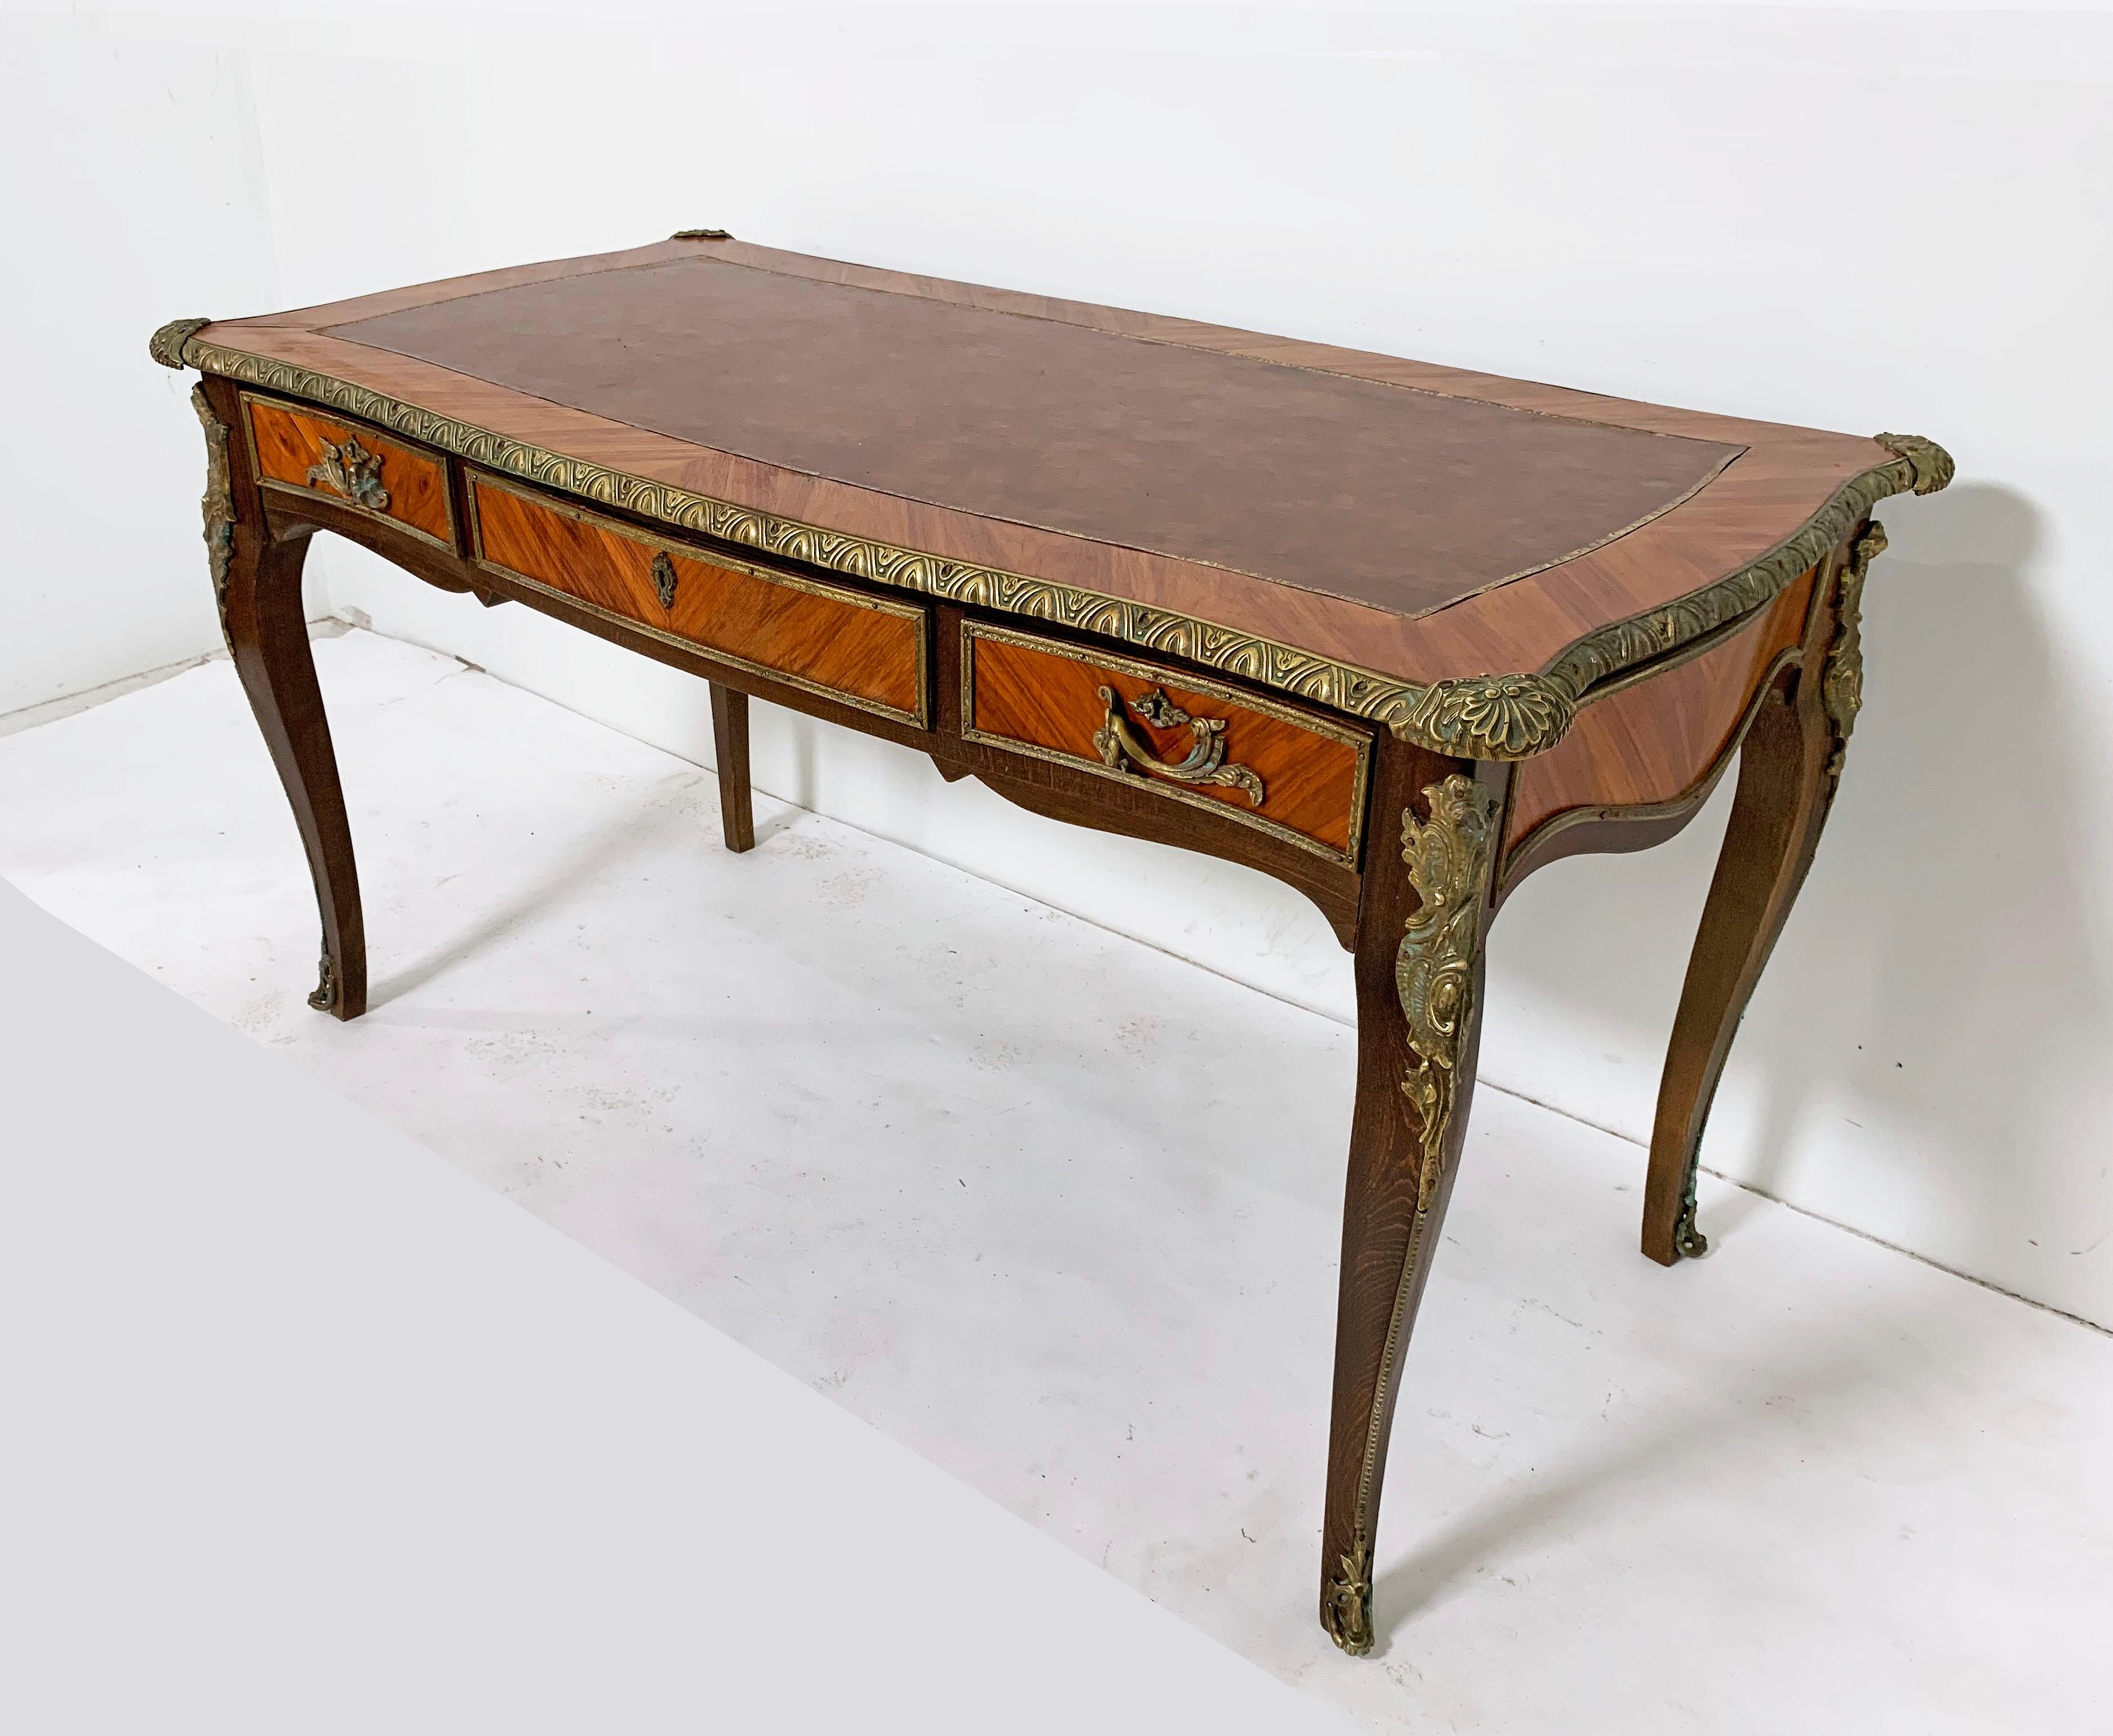 A Classic French Louis XV “bureau plat” writing desk in ribbon mahogany and walnut with brass ormolu and leather writing surface panel, circa 1950s.